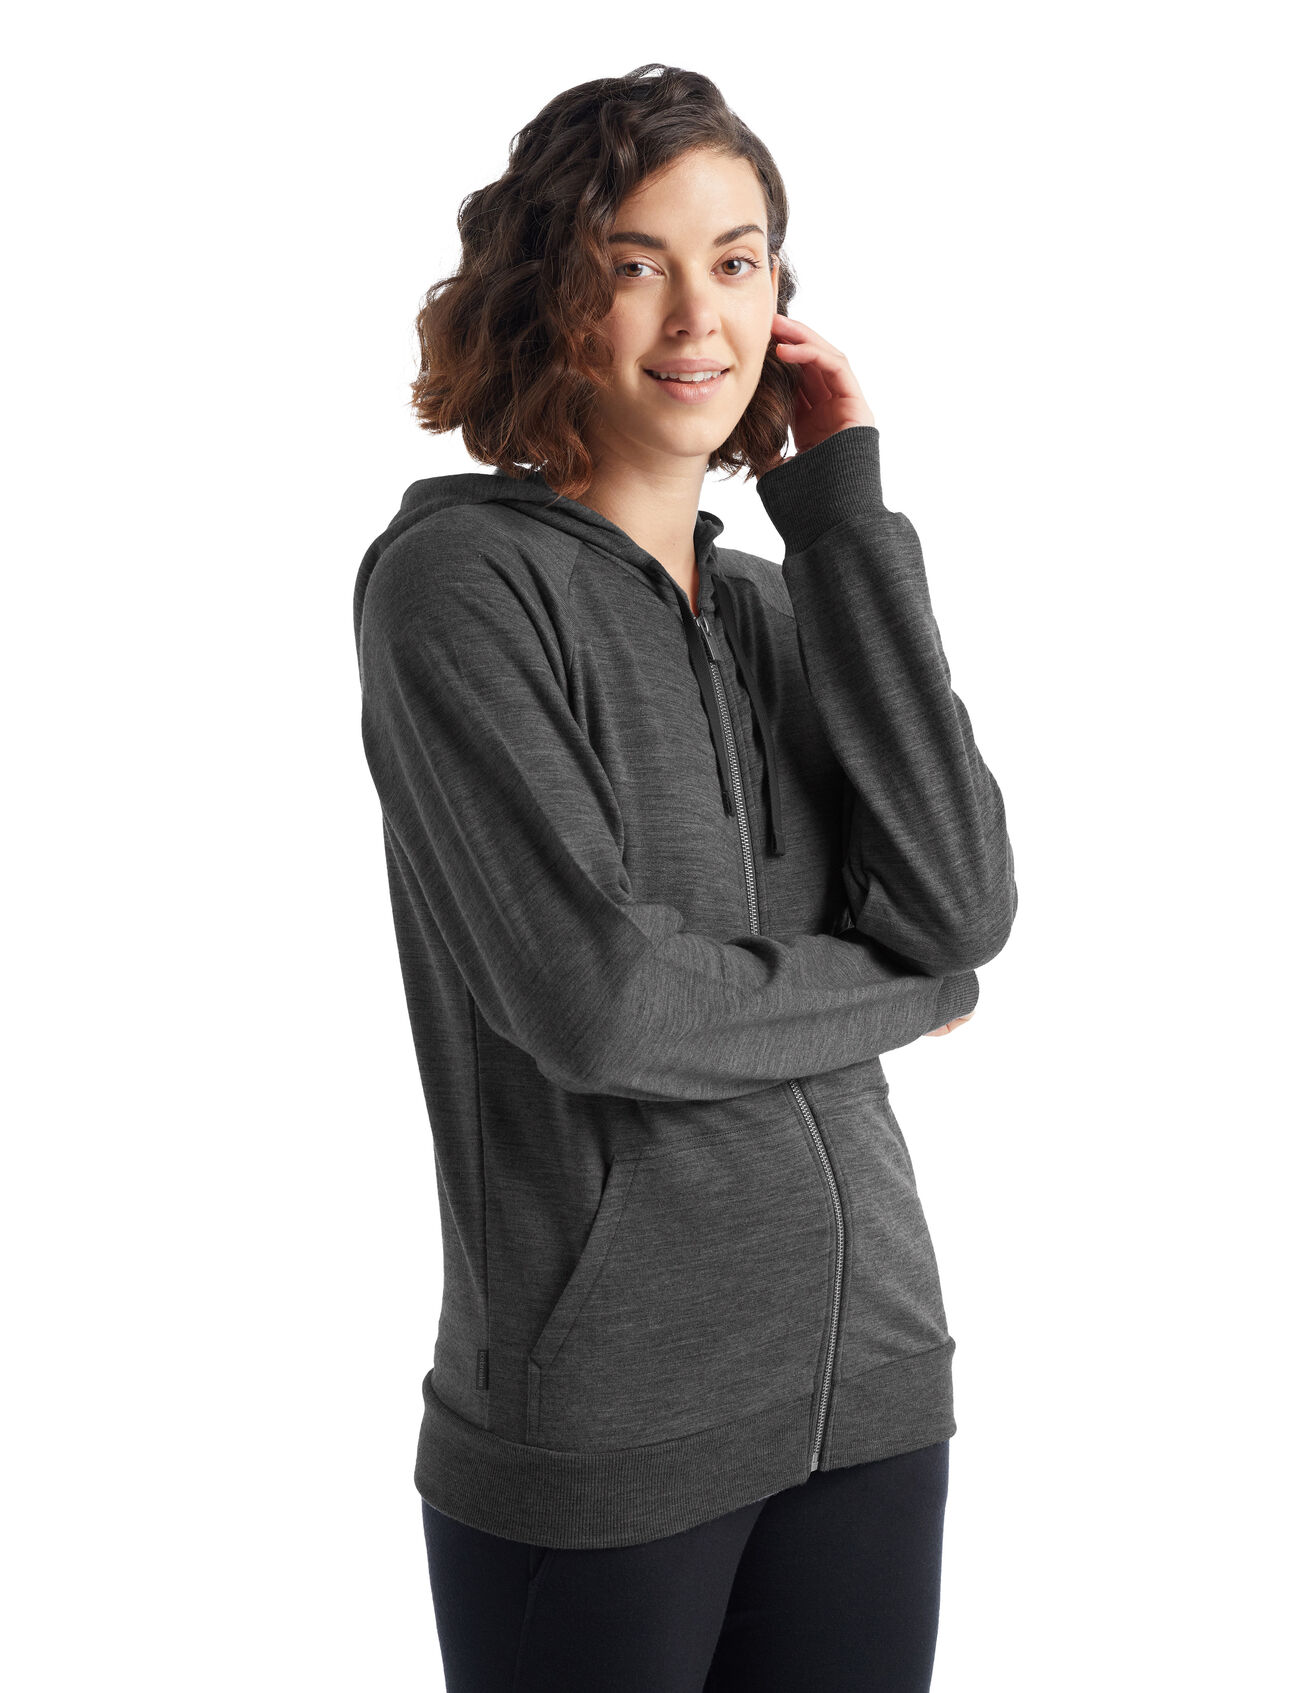 Womens Merino Helliers Terry Long Sleeve Zip Hoodie A classic, everyday hoodie ideal for cool-weather layering, the Helliers Terry Long Sleeve Zip Hood features 100% merino wool terry fabric for super-soft comfort and natural breathability.